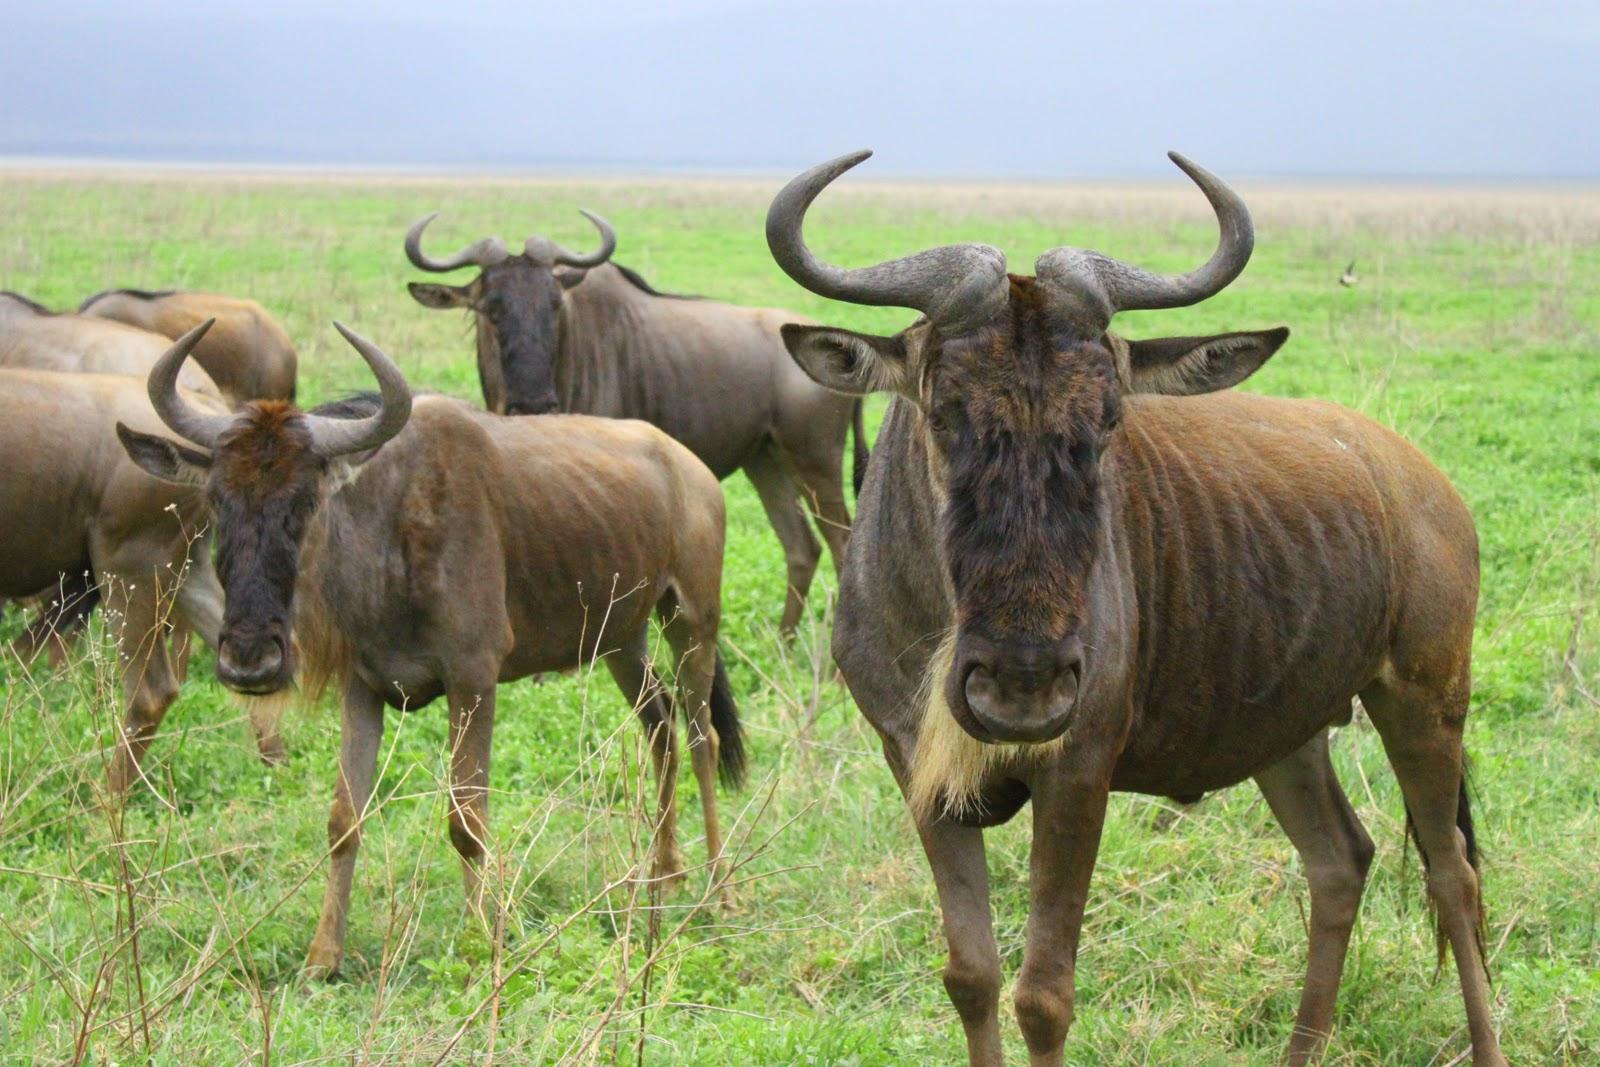 Implausibility of Gnus